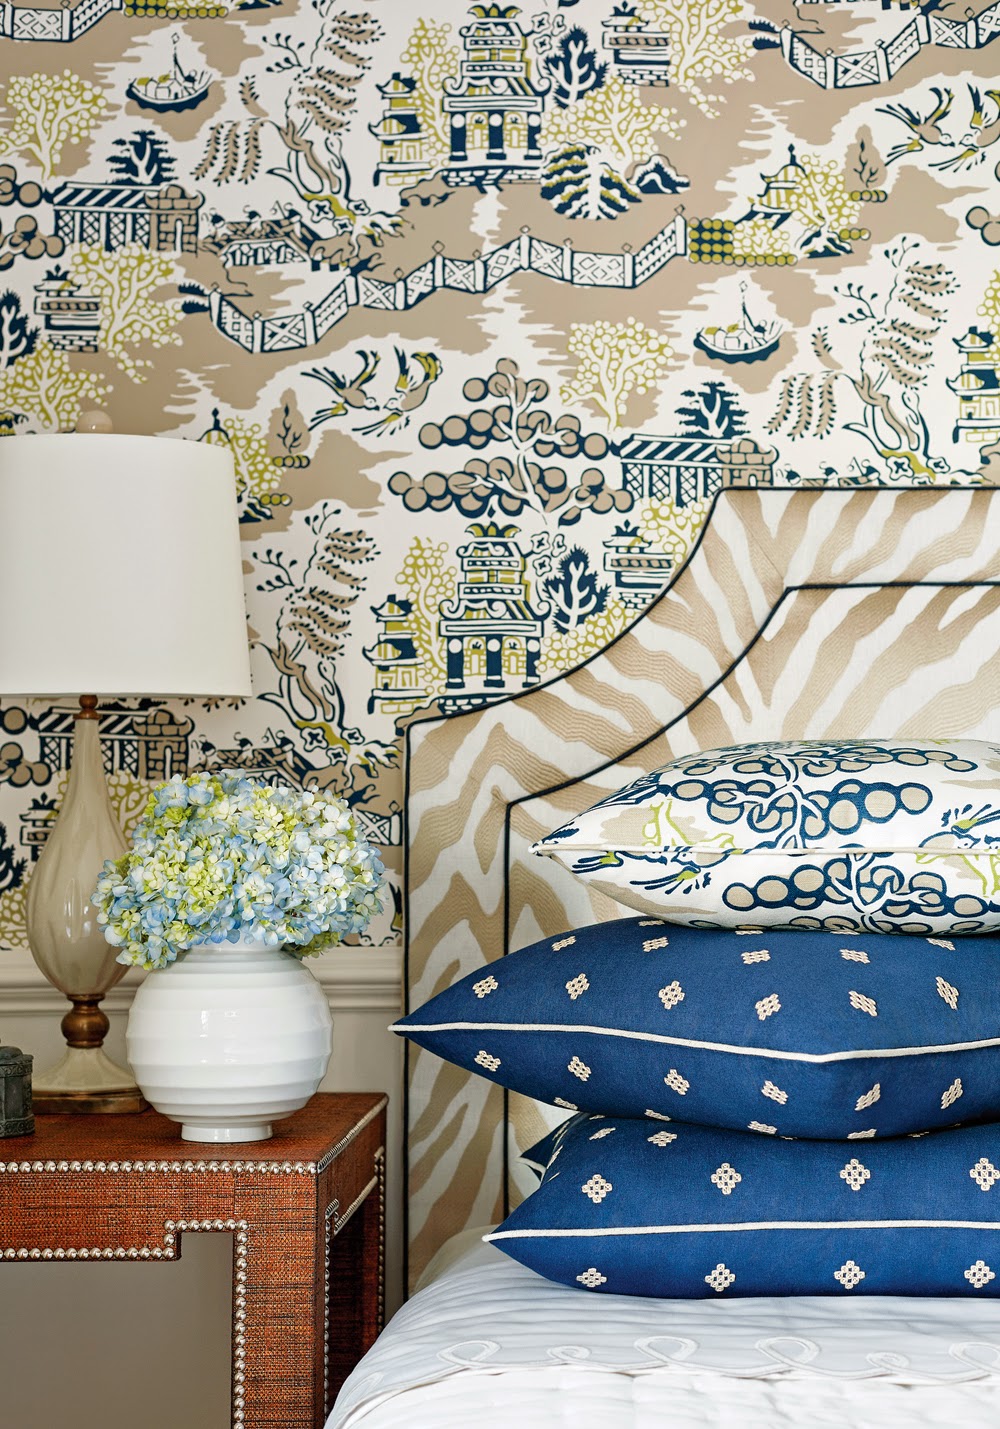 Factory Paint & Decorating: A New Interpretation of Chinoiserie ...